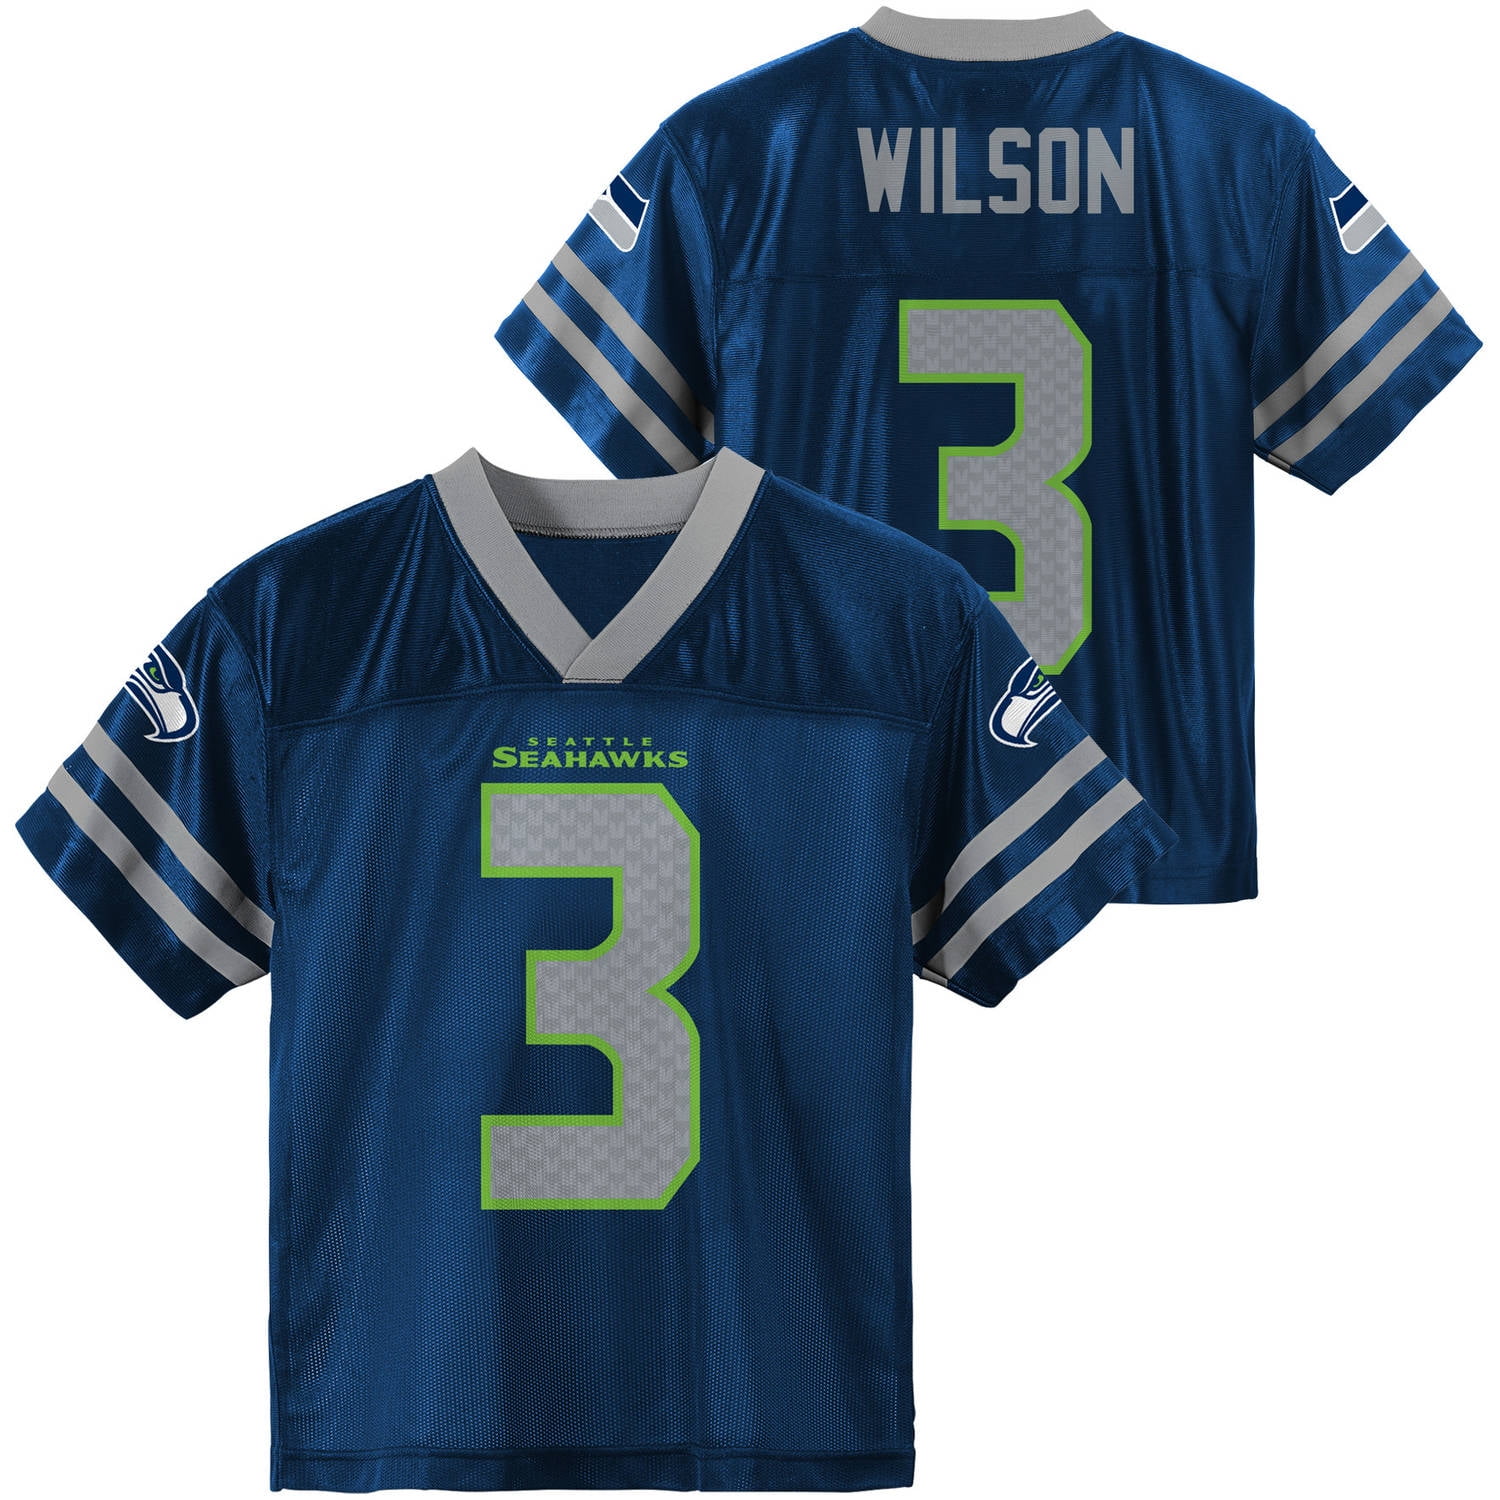 NFL, Player: R Wilson, Seatle Seahawks, YOUTH Player Jersey, Size 4(XS) -  18(XXL), Team Color with Number 